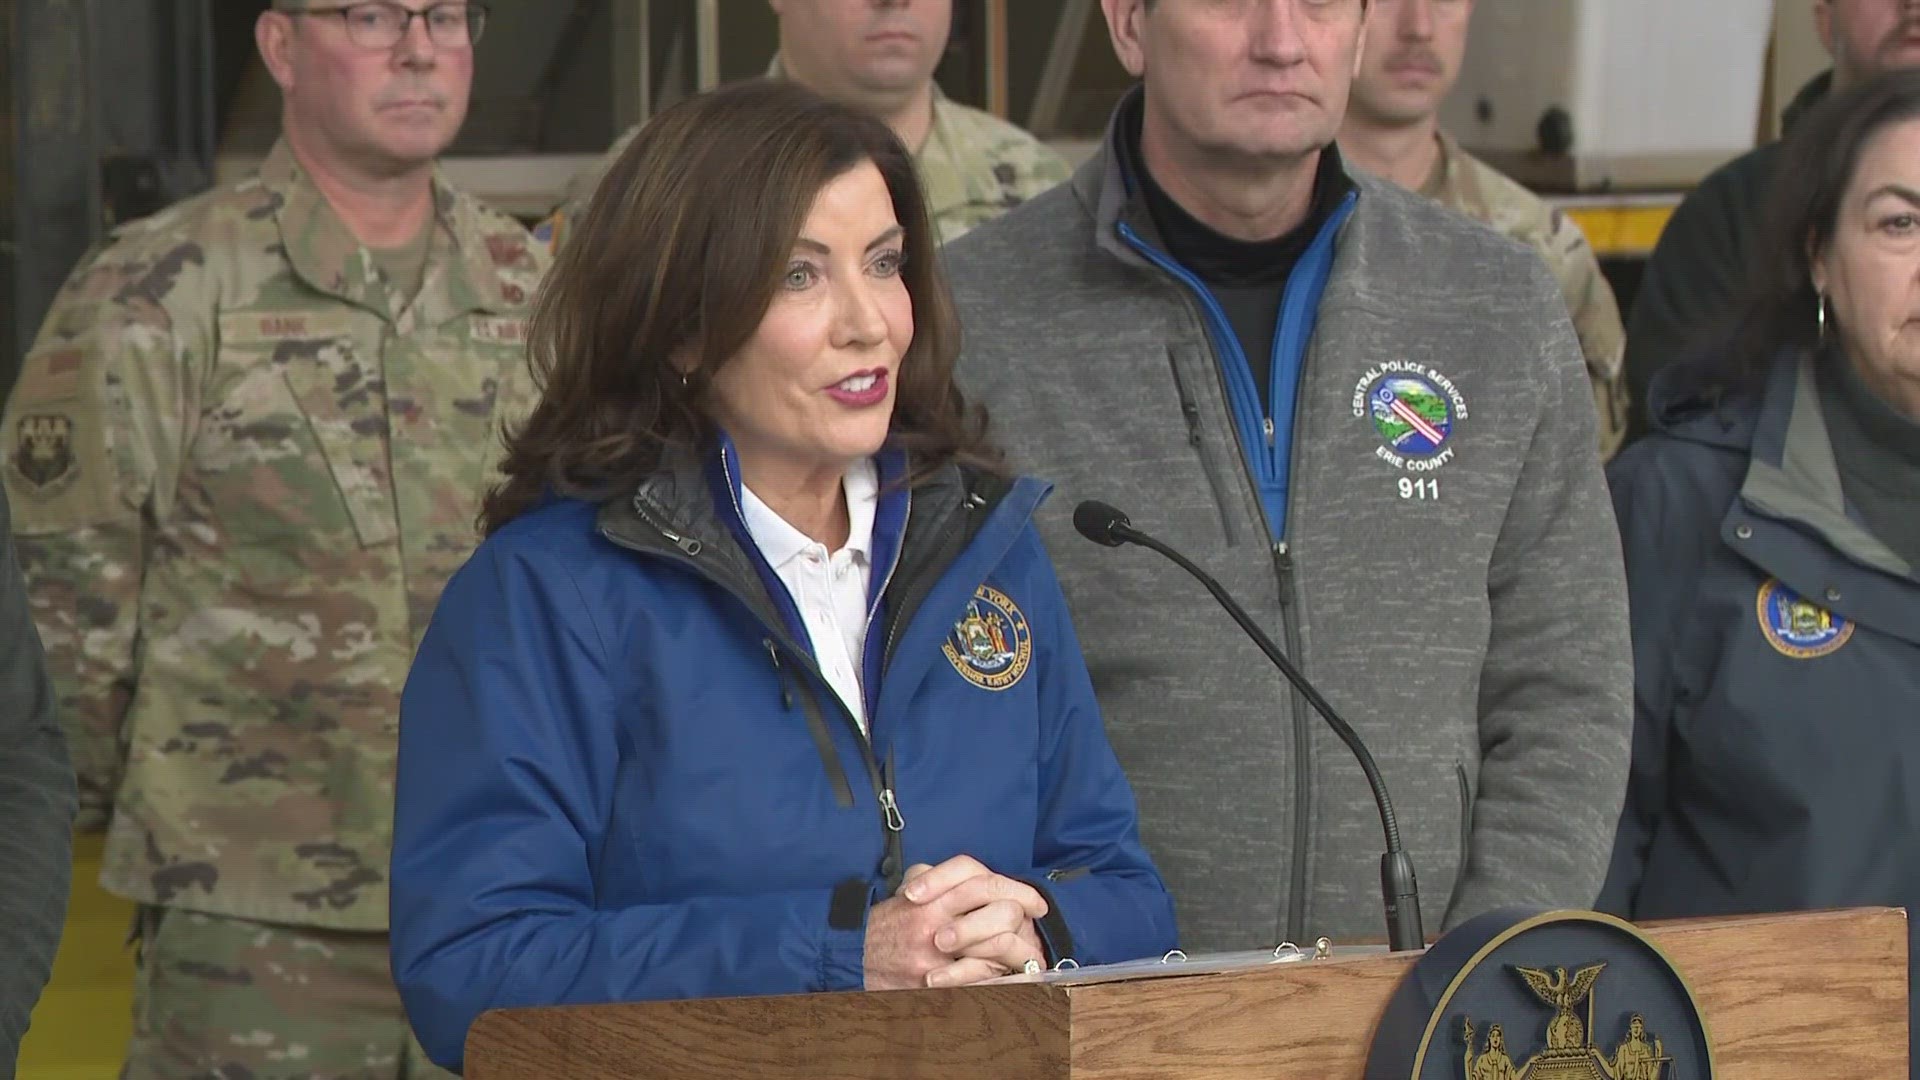 Gov. Hochul announced that the Bills game against the Steelers will be postponed until Monday.